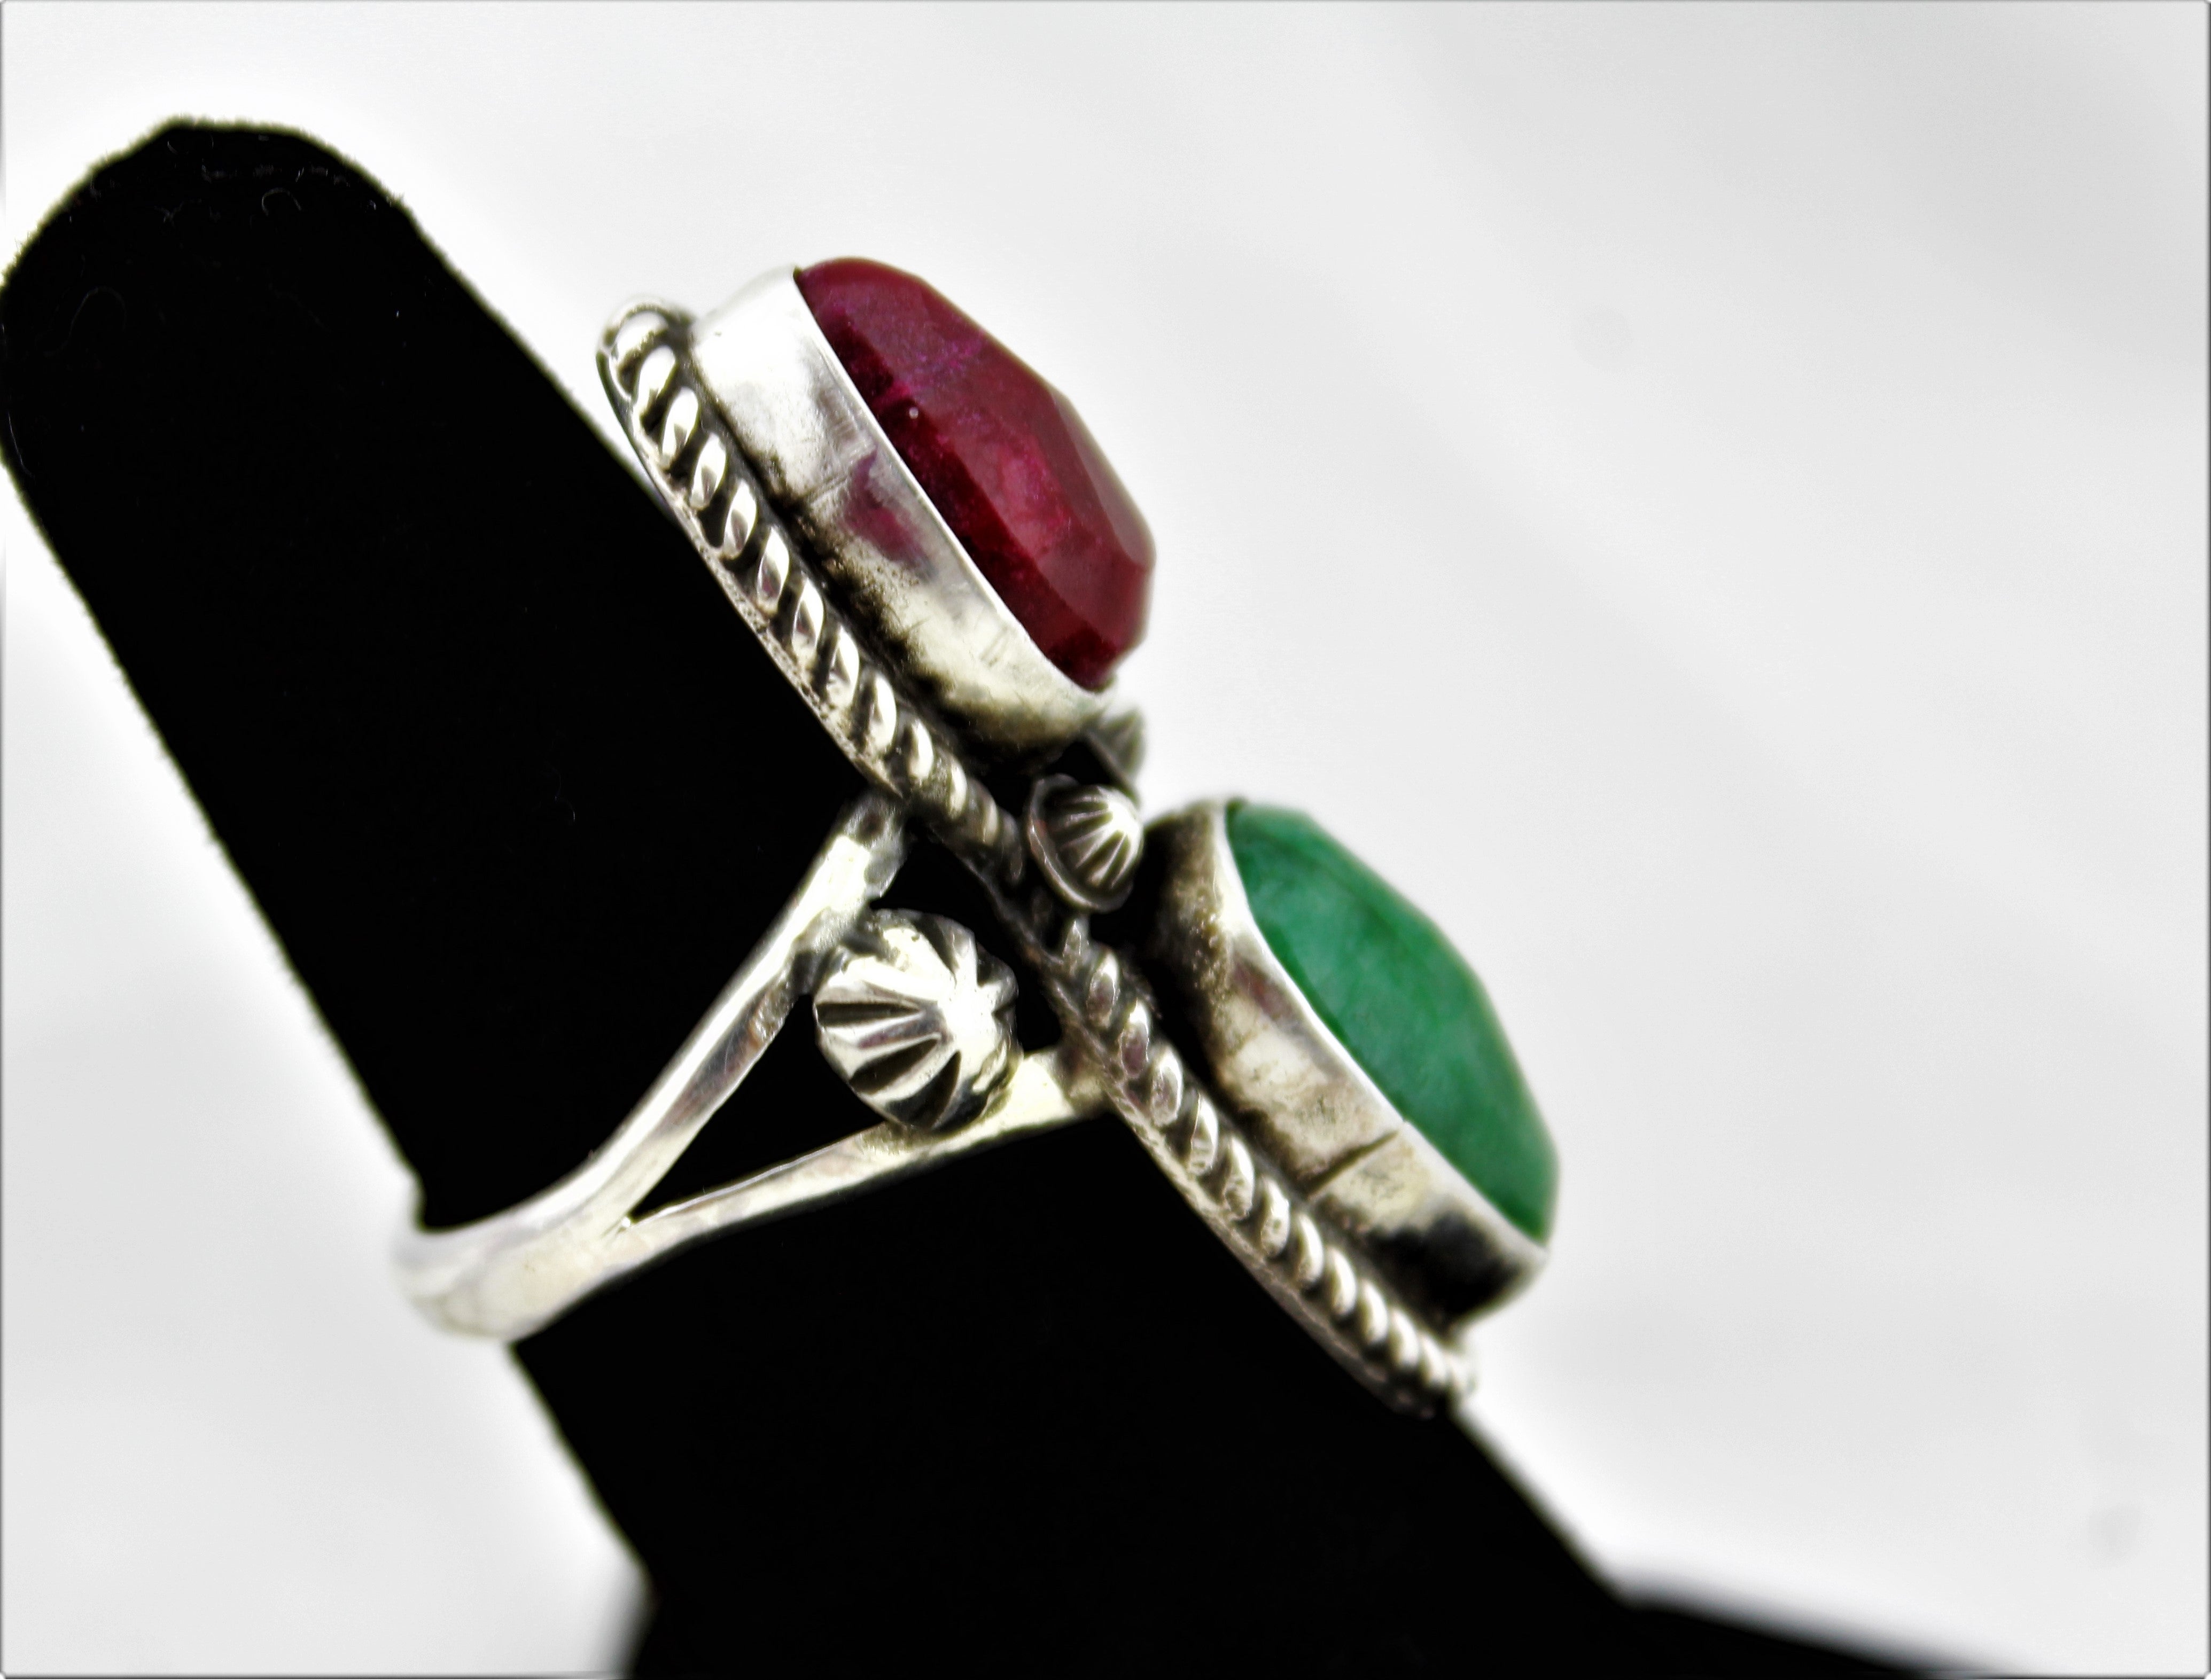 Ruby and Emerald Sterling Silver Ring